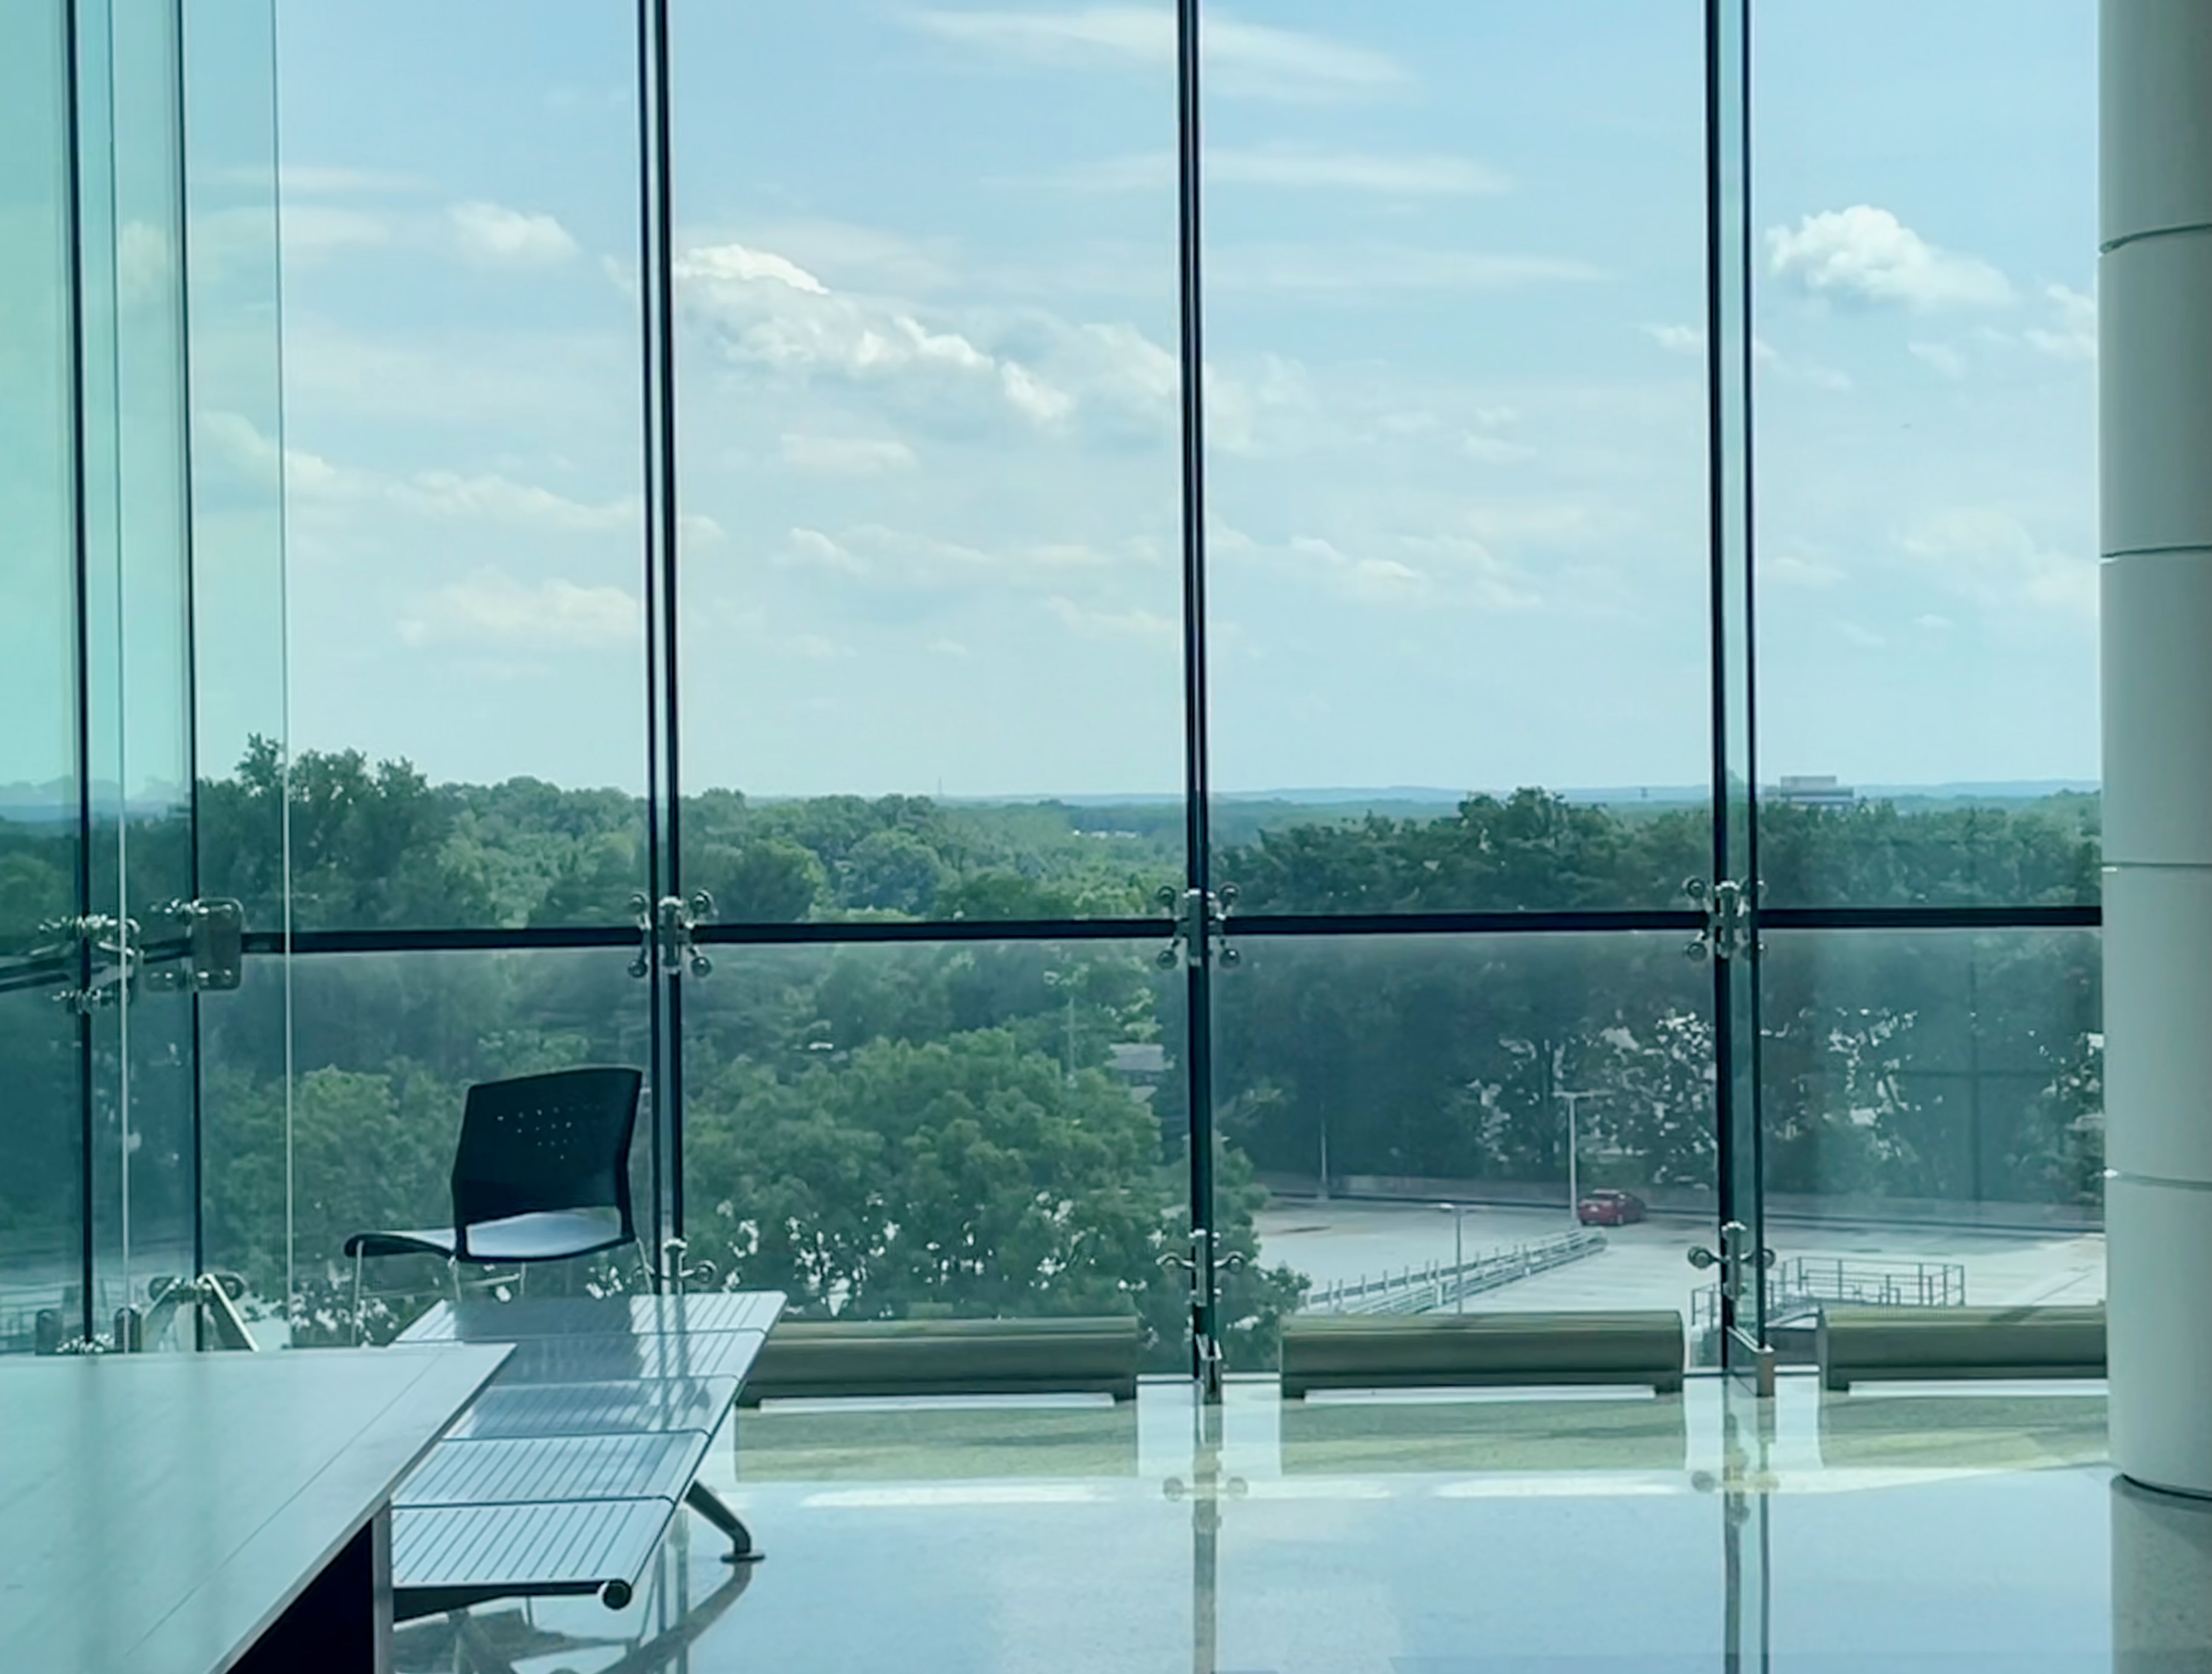 Large floor-to-ceiling windows overlooking a verdant view from the Montgomery County Courthouse.